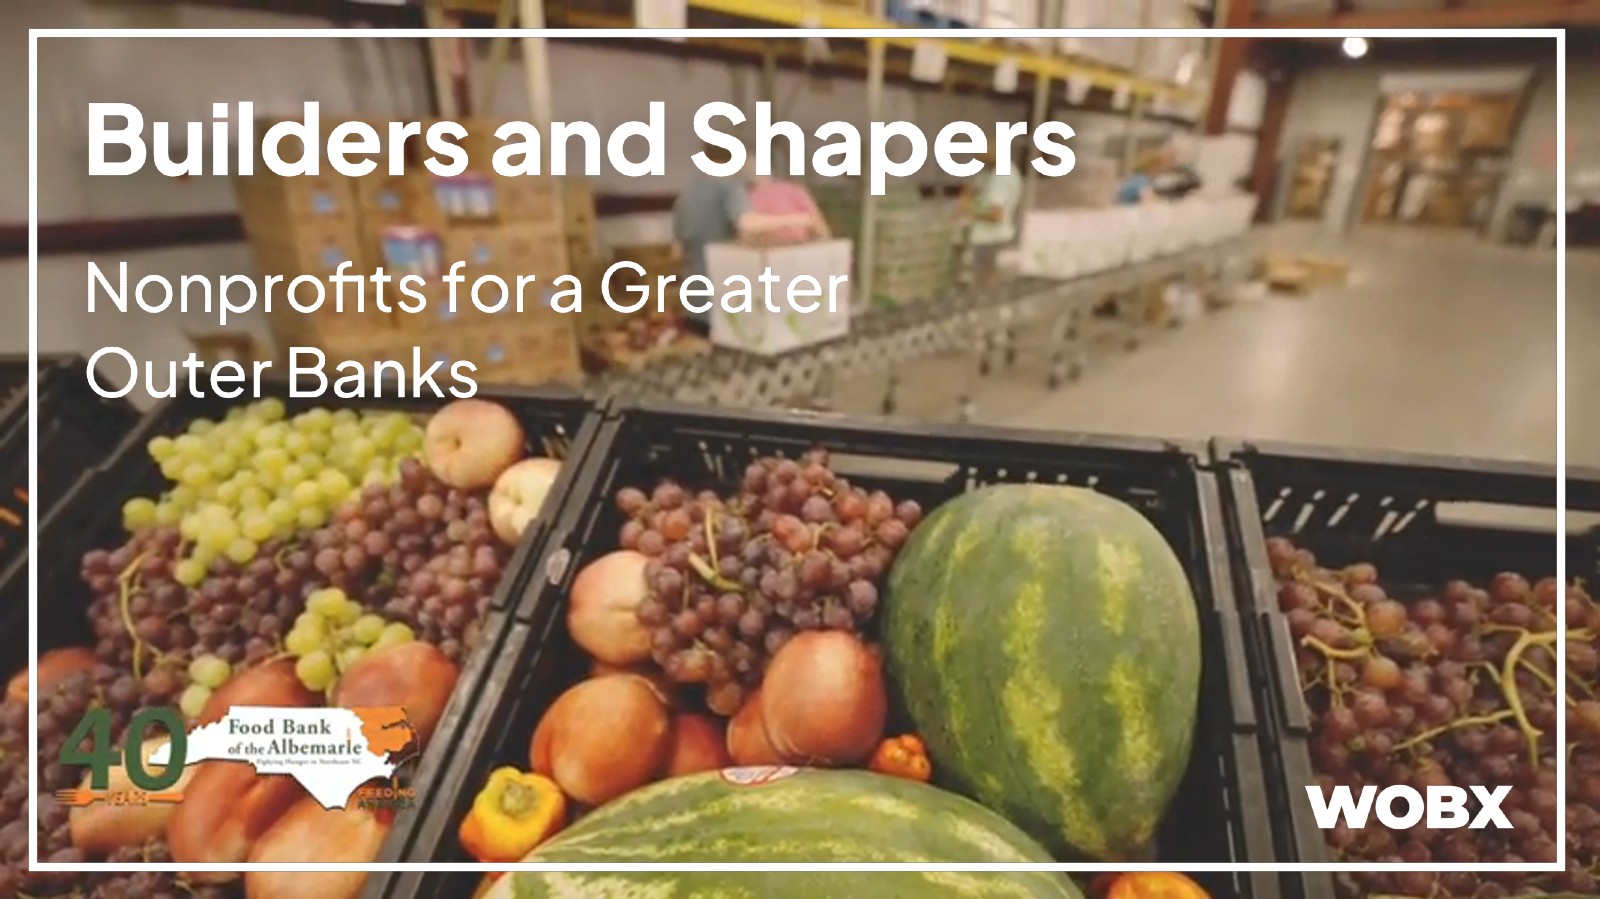 Builders and Shapers: Food Bank of the Albemarle